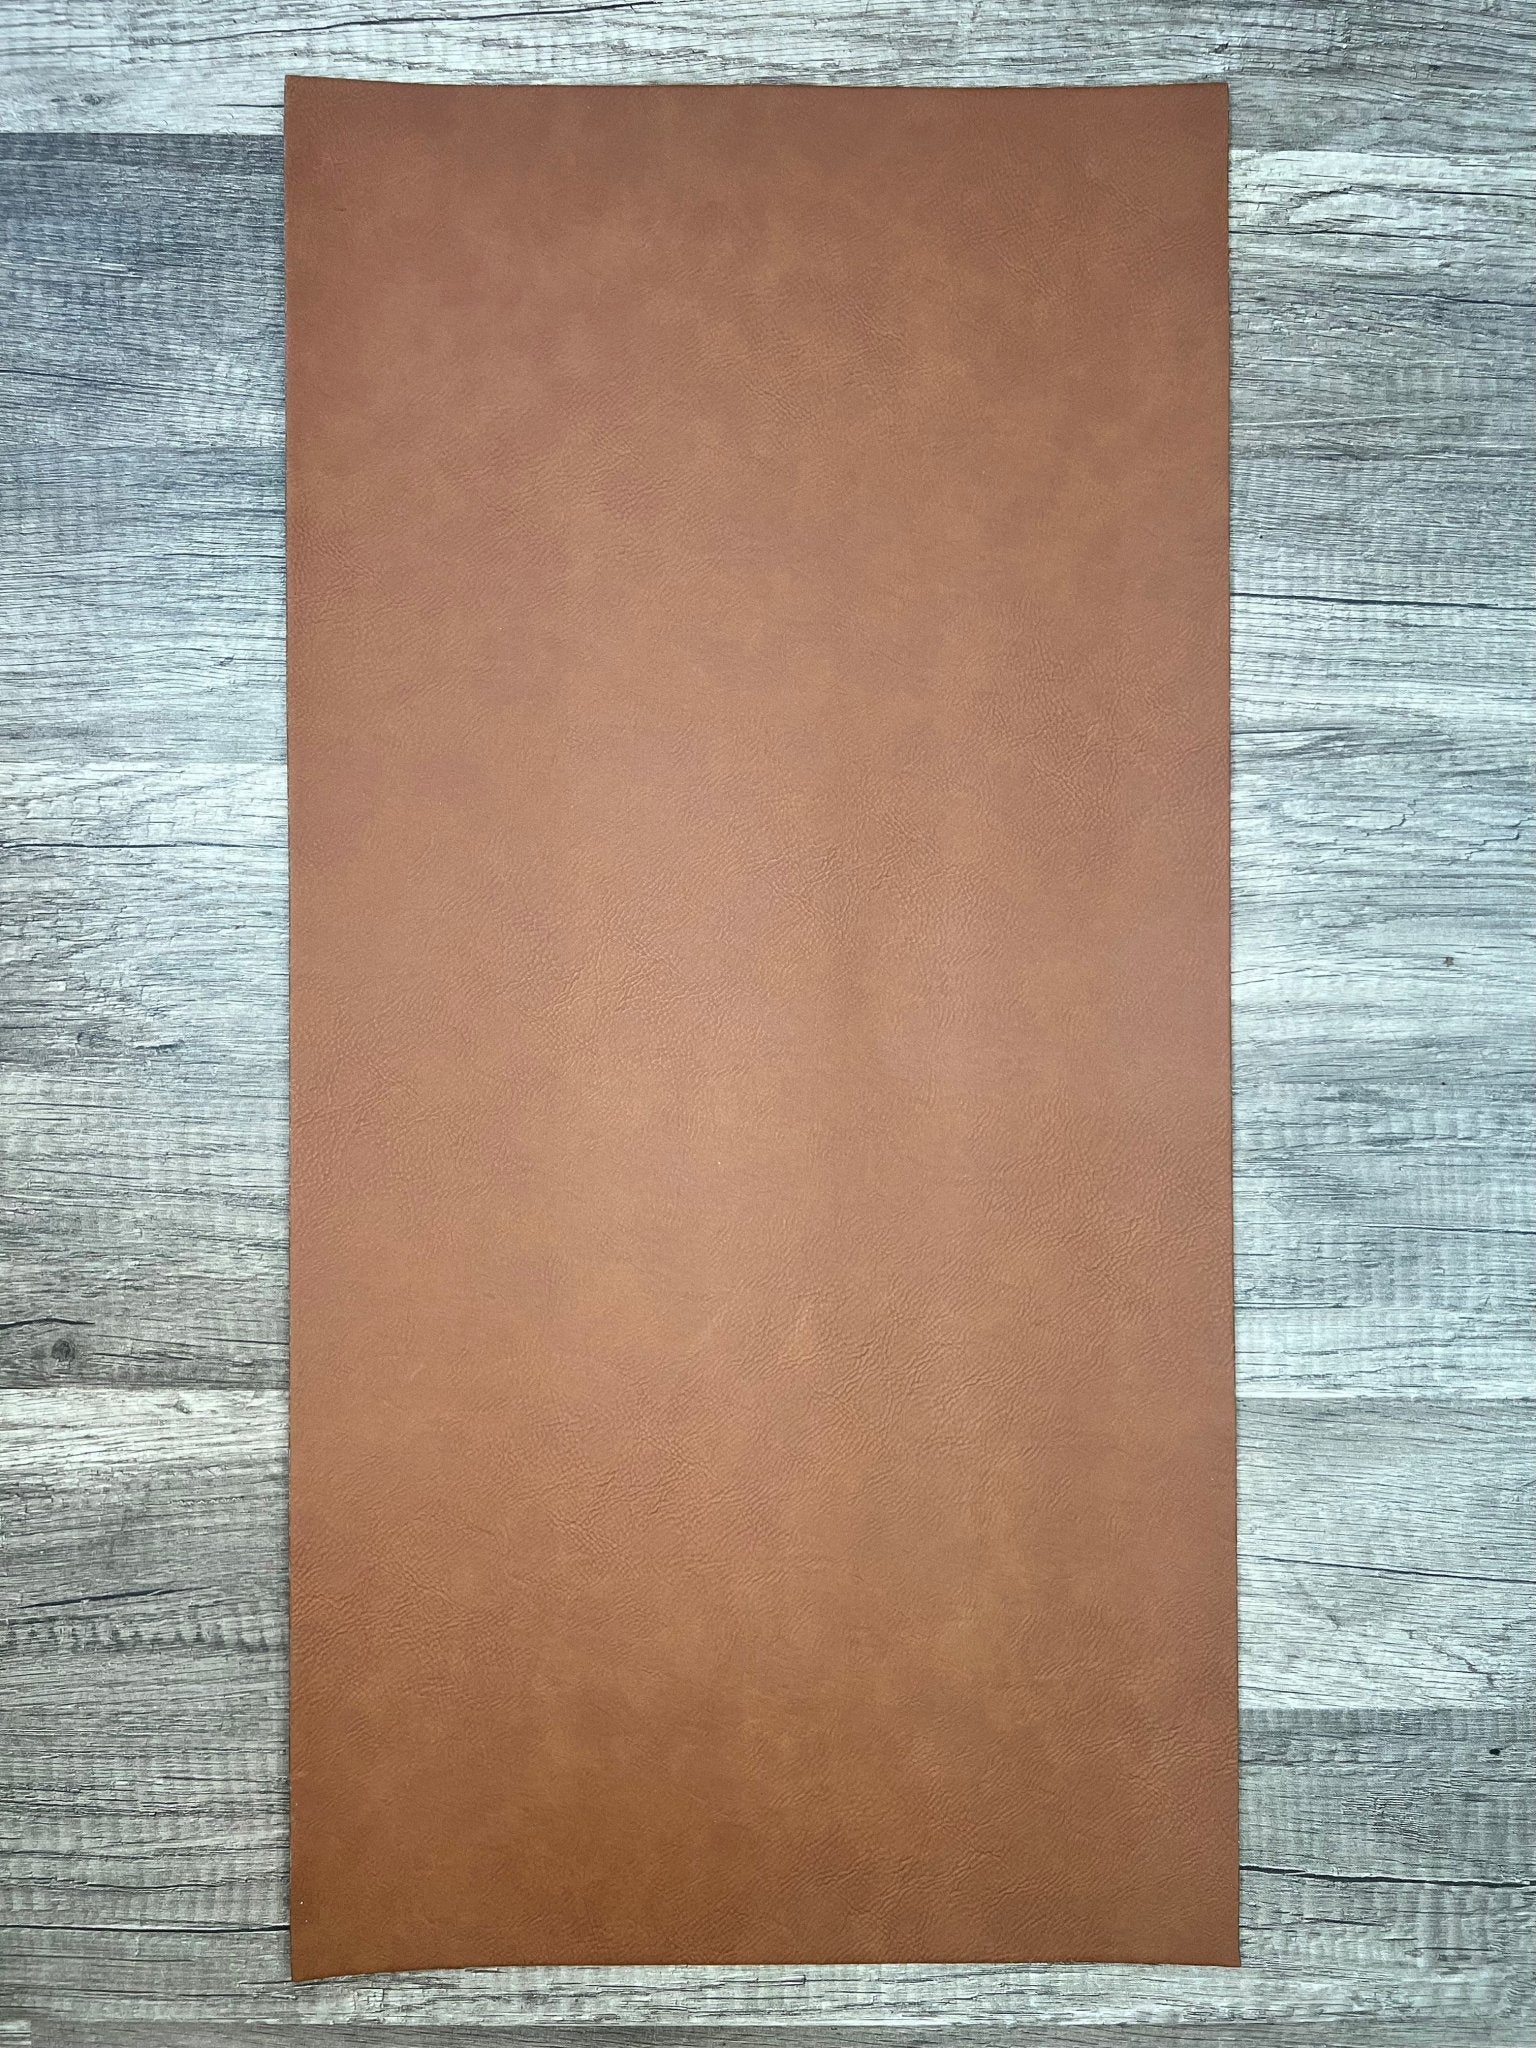 does pvc leather peel - BZ Leather Company